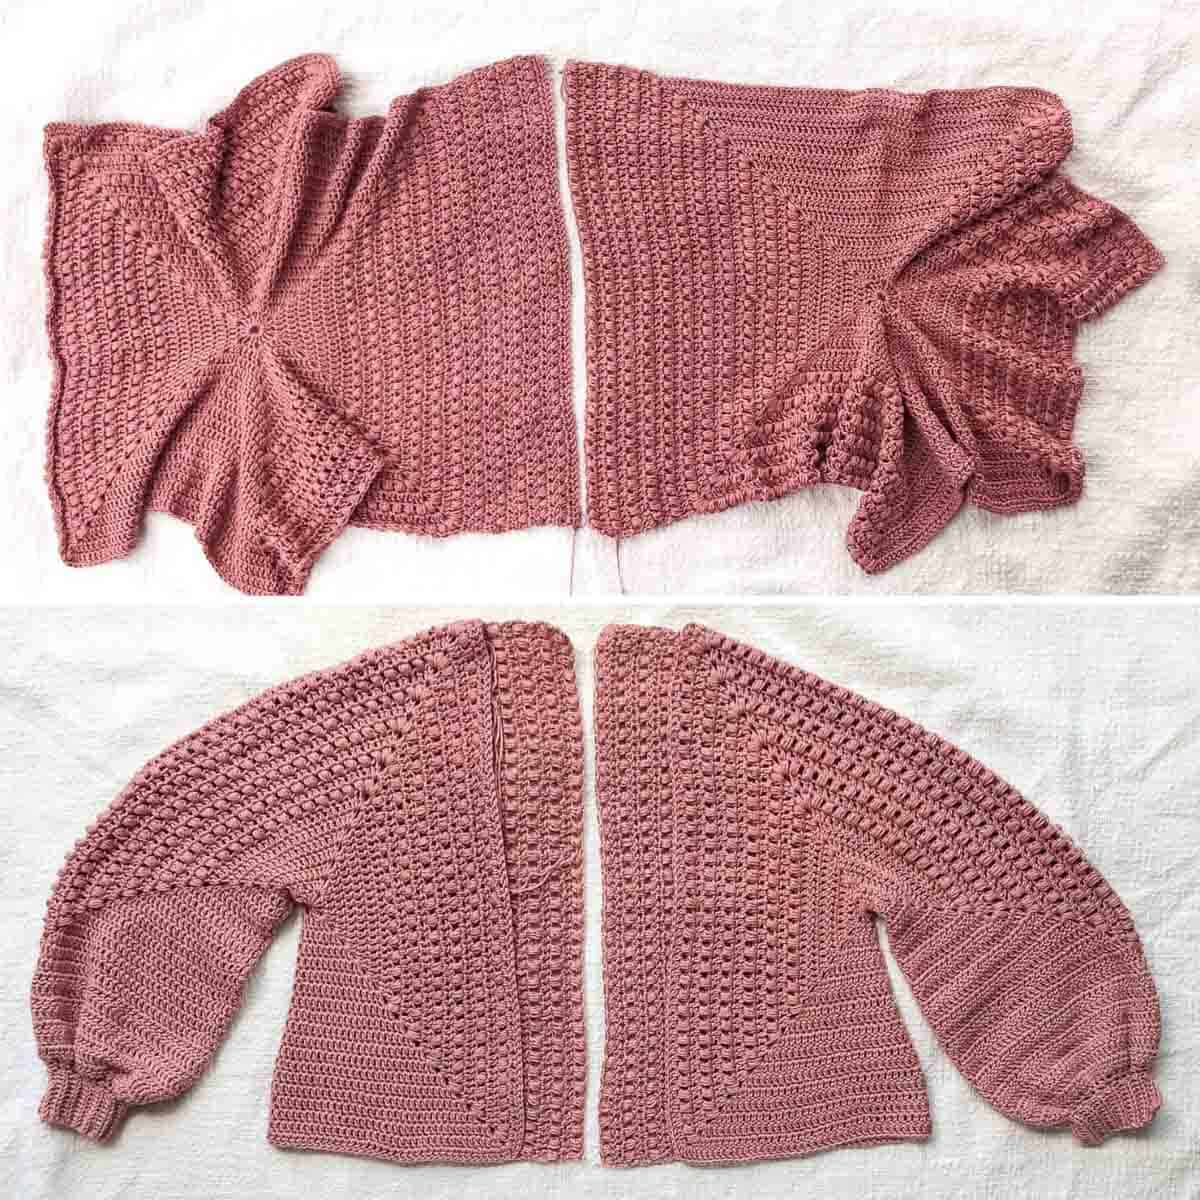 An overhead shot of how two crochet hexagons are transformed into a drapey, oversized cardigan.